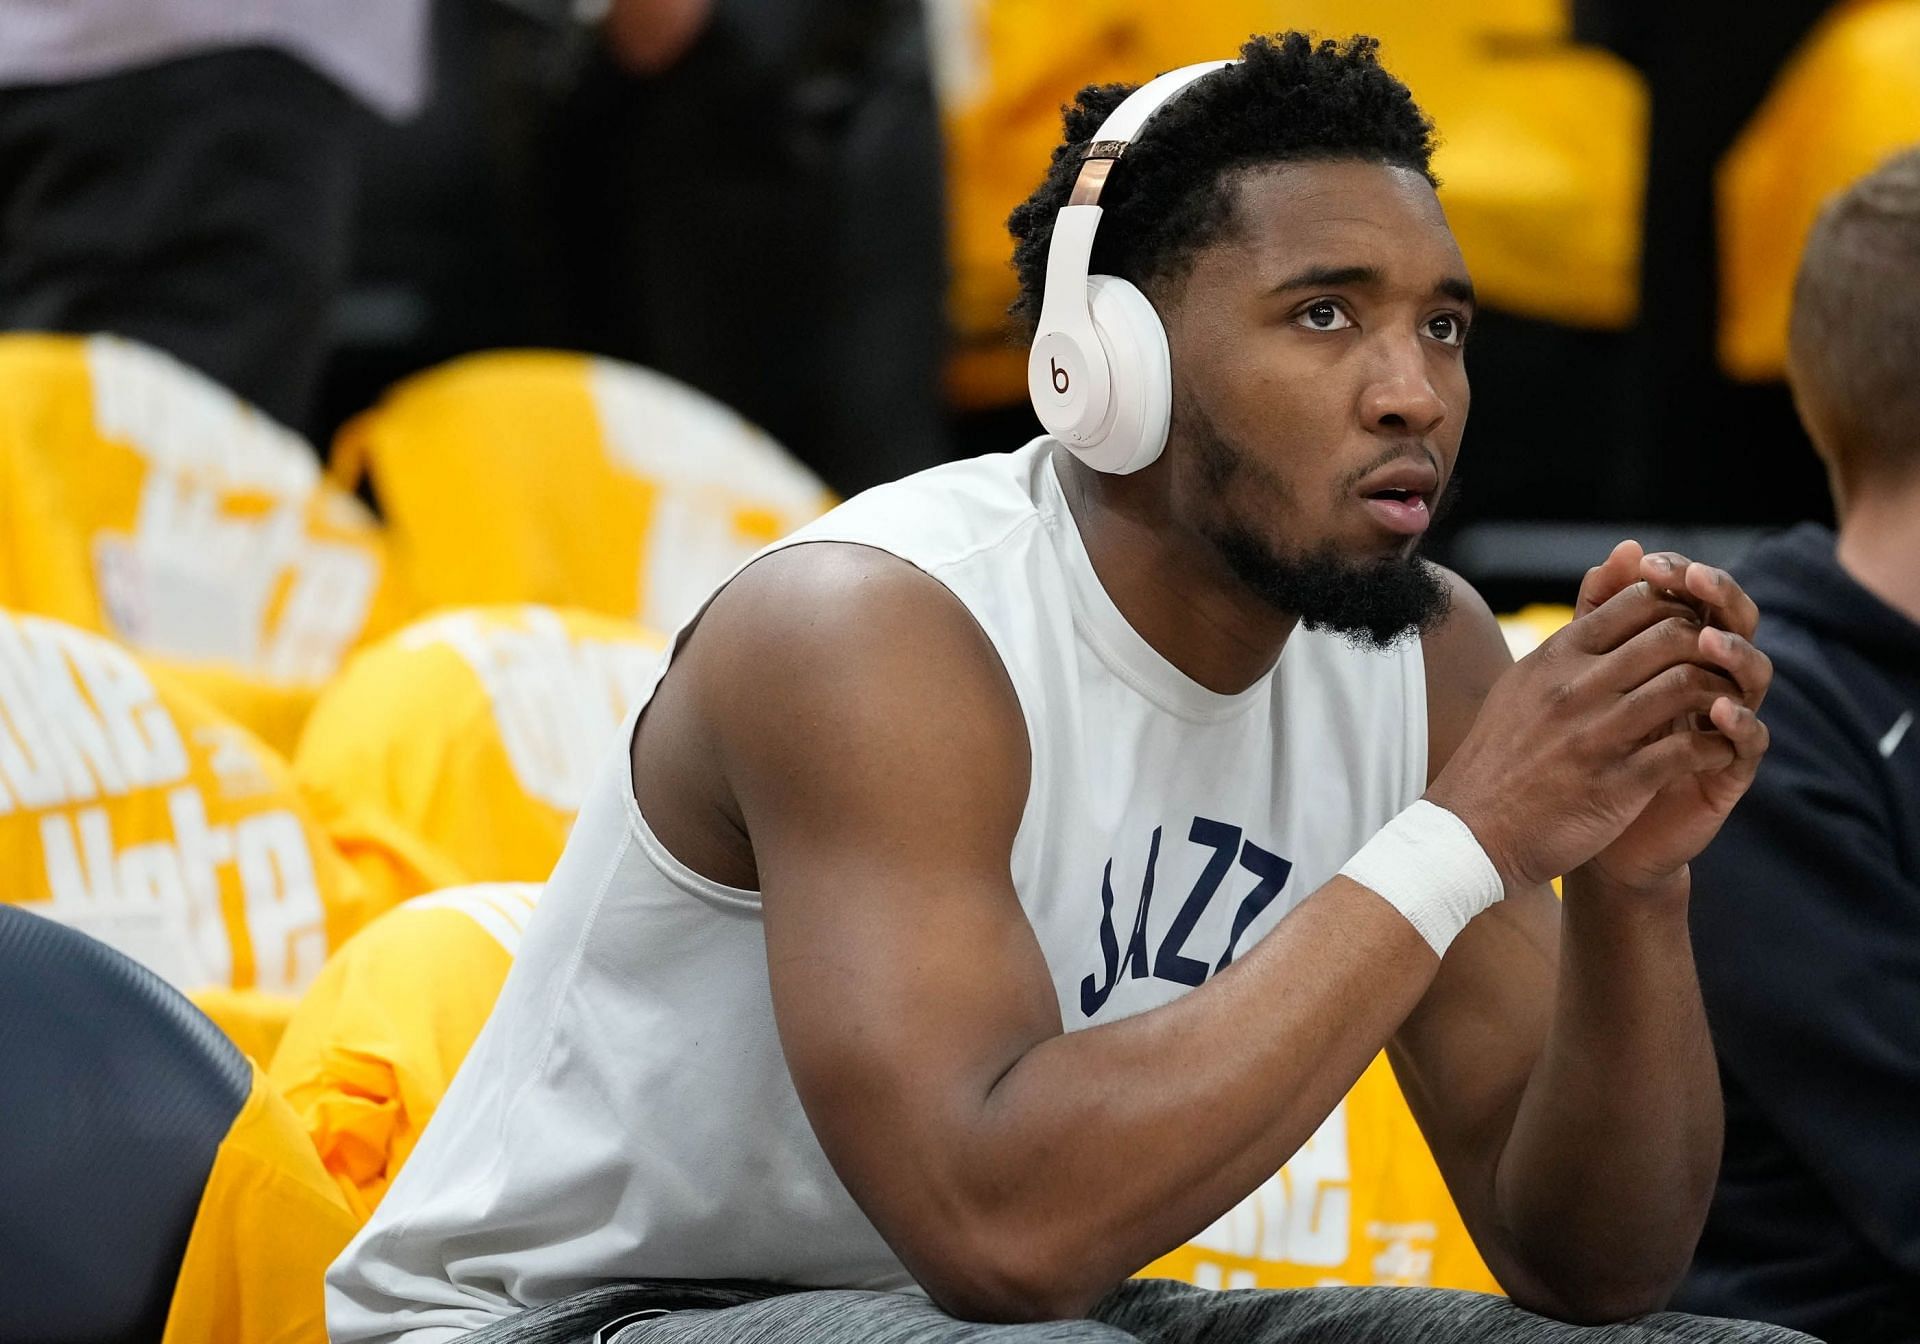 Donovan Mitchell may have to wait for his player option availability after the 2024-25 season to move out of Salt Lake City. [Photo: The Salt Lake Tribune]